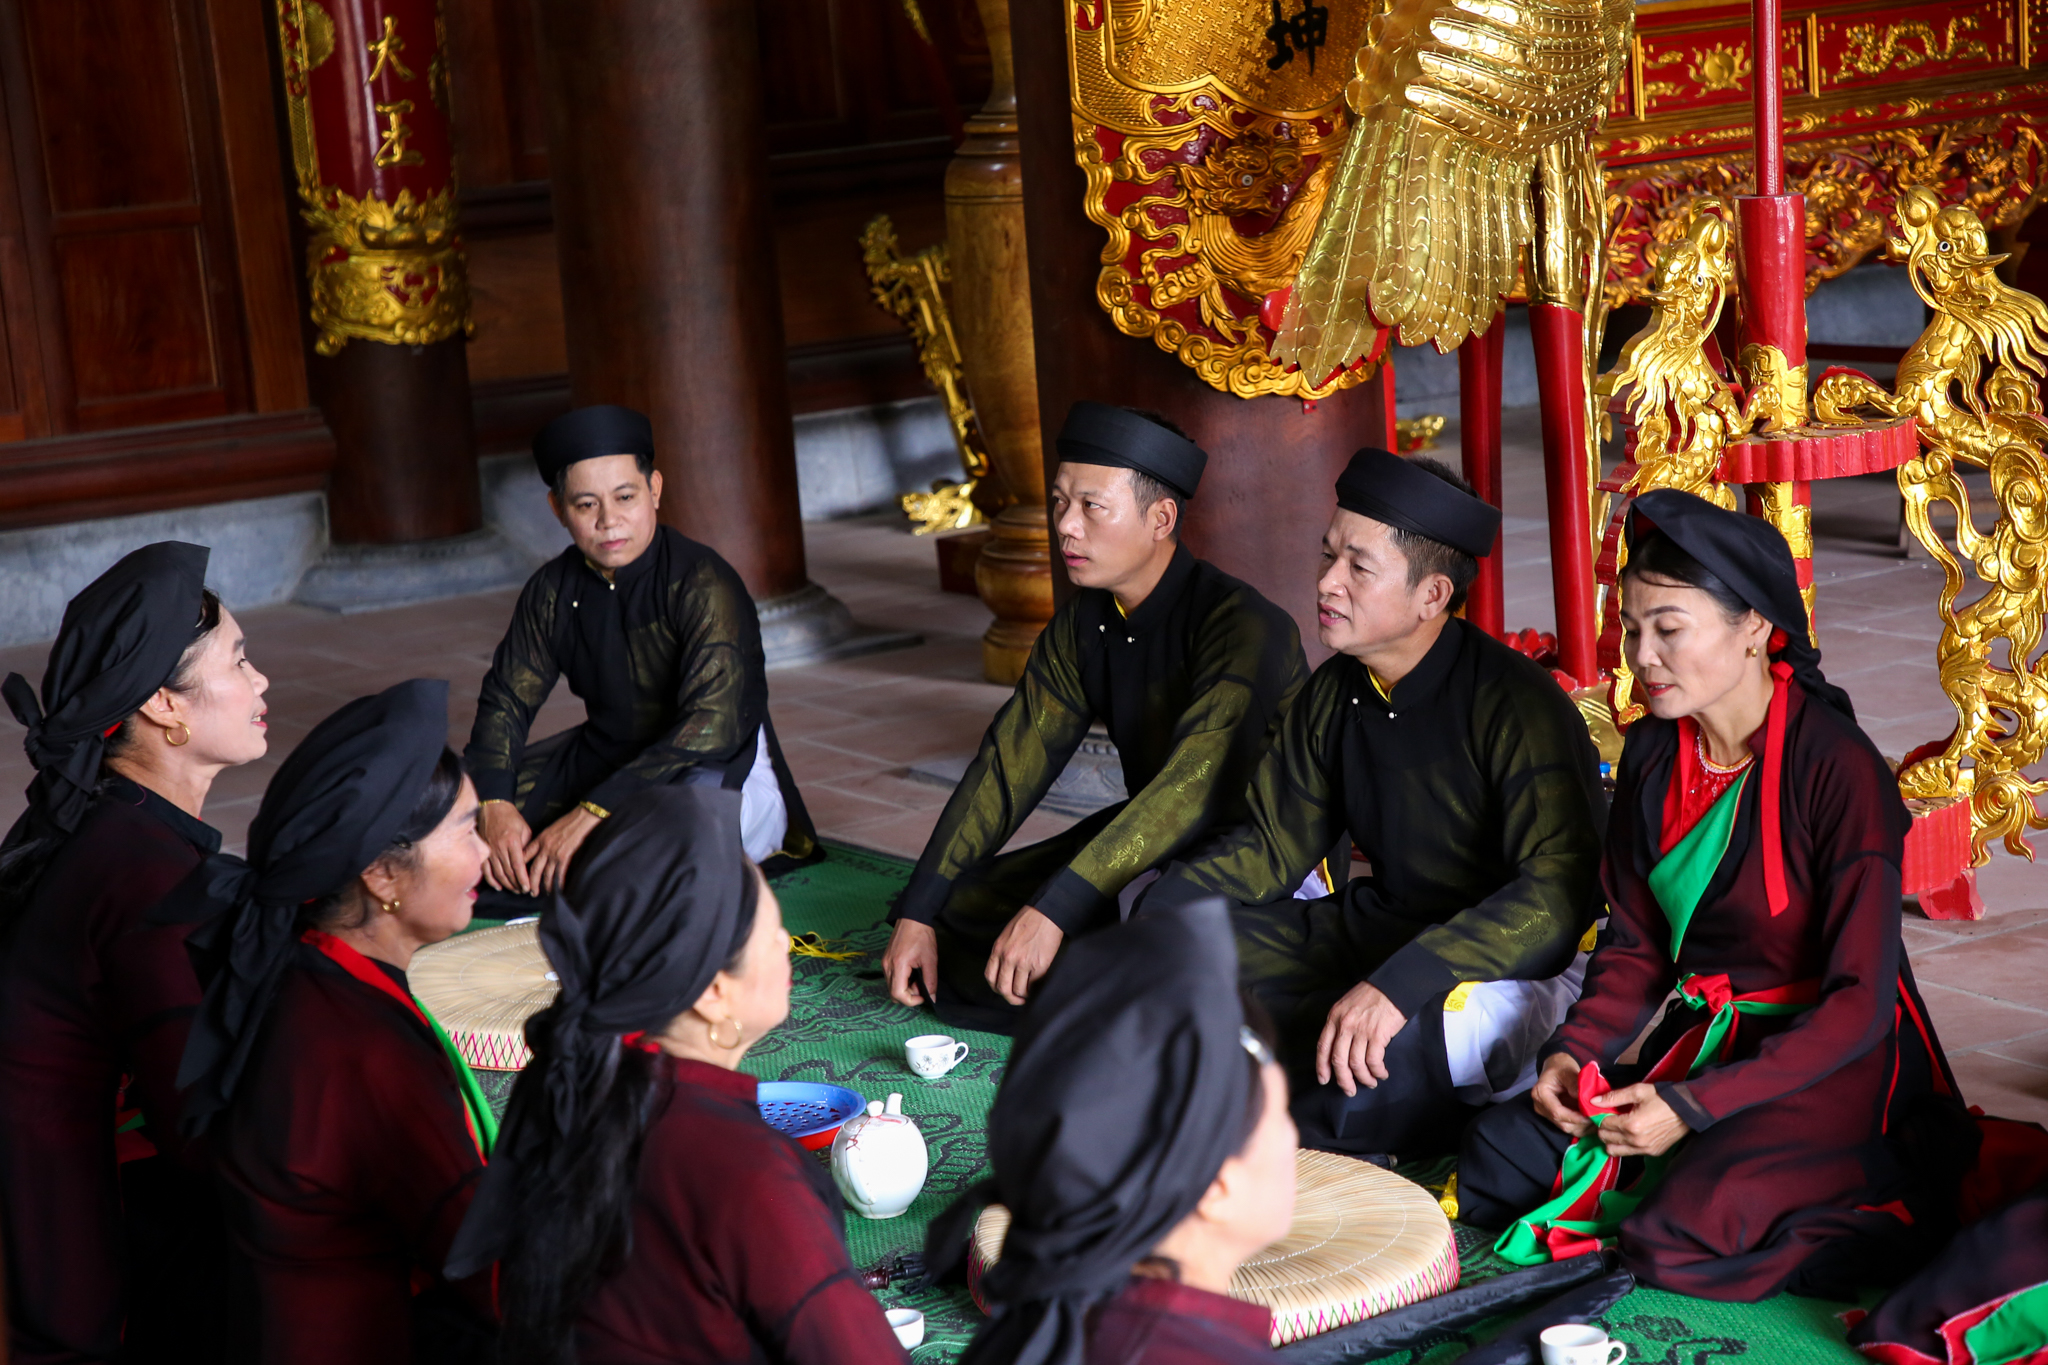 Artisans consider “hat chieu” the pinnacle of quan ho when the participants must have a great deal of knowledge and understanding about the ancient quan ho.